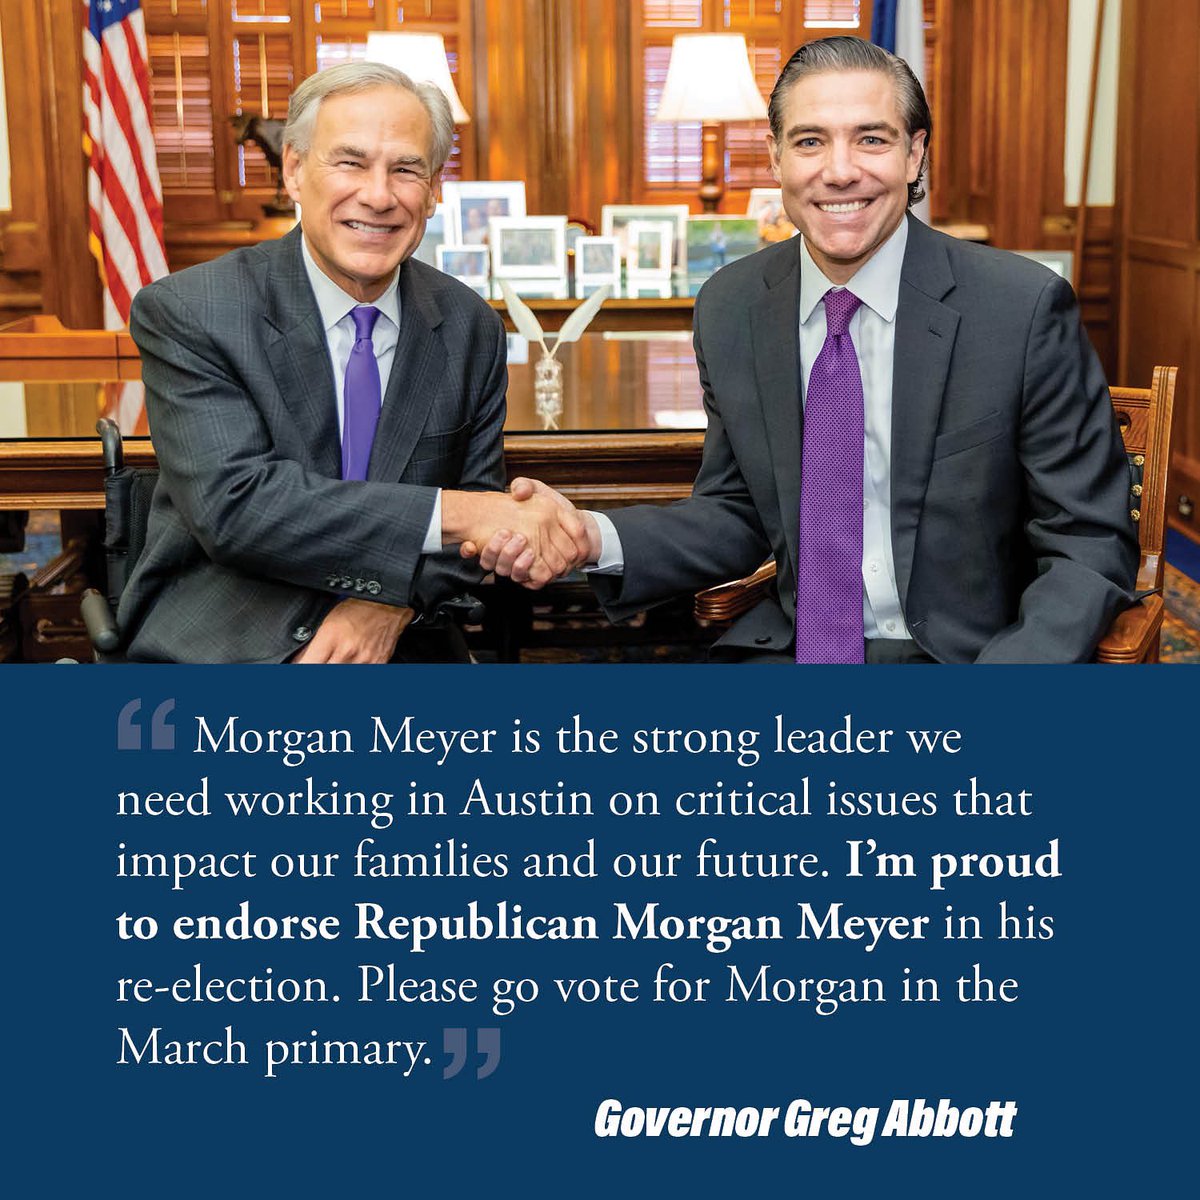 Honored to have the endorsement from @GovAbbott! Look forward to continuing to work for a stronger, safer Texas.